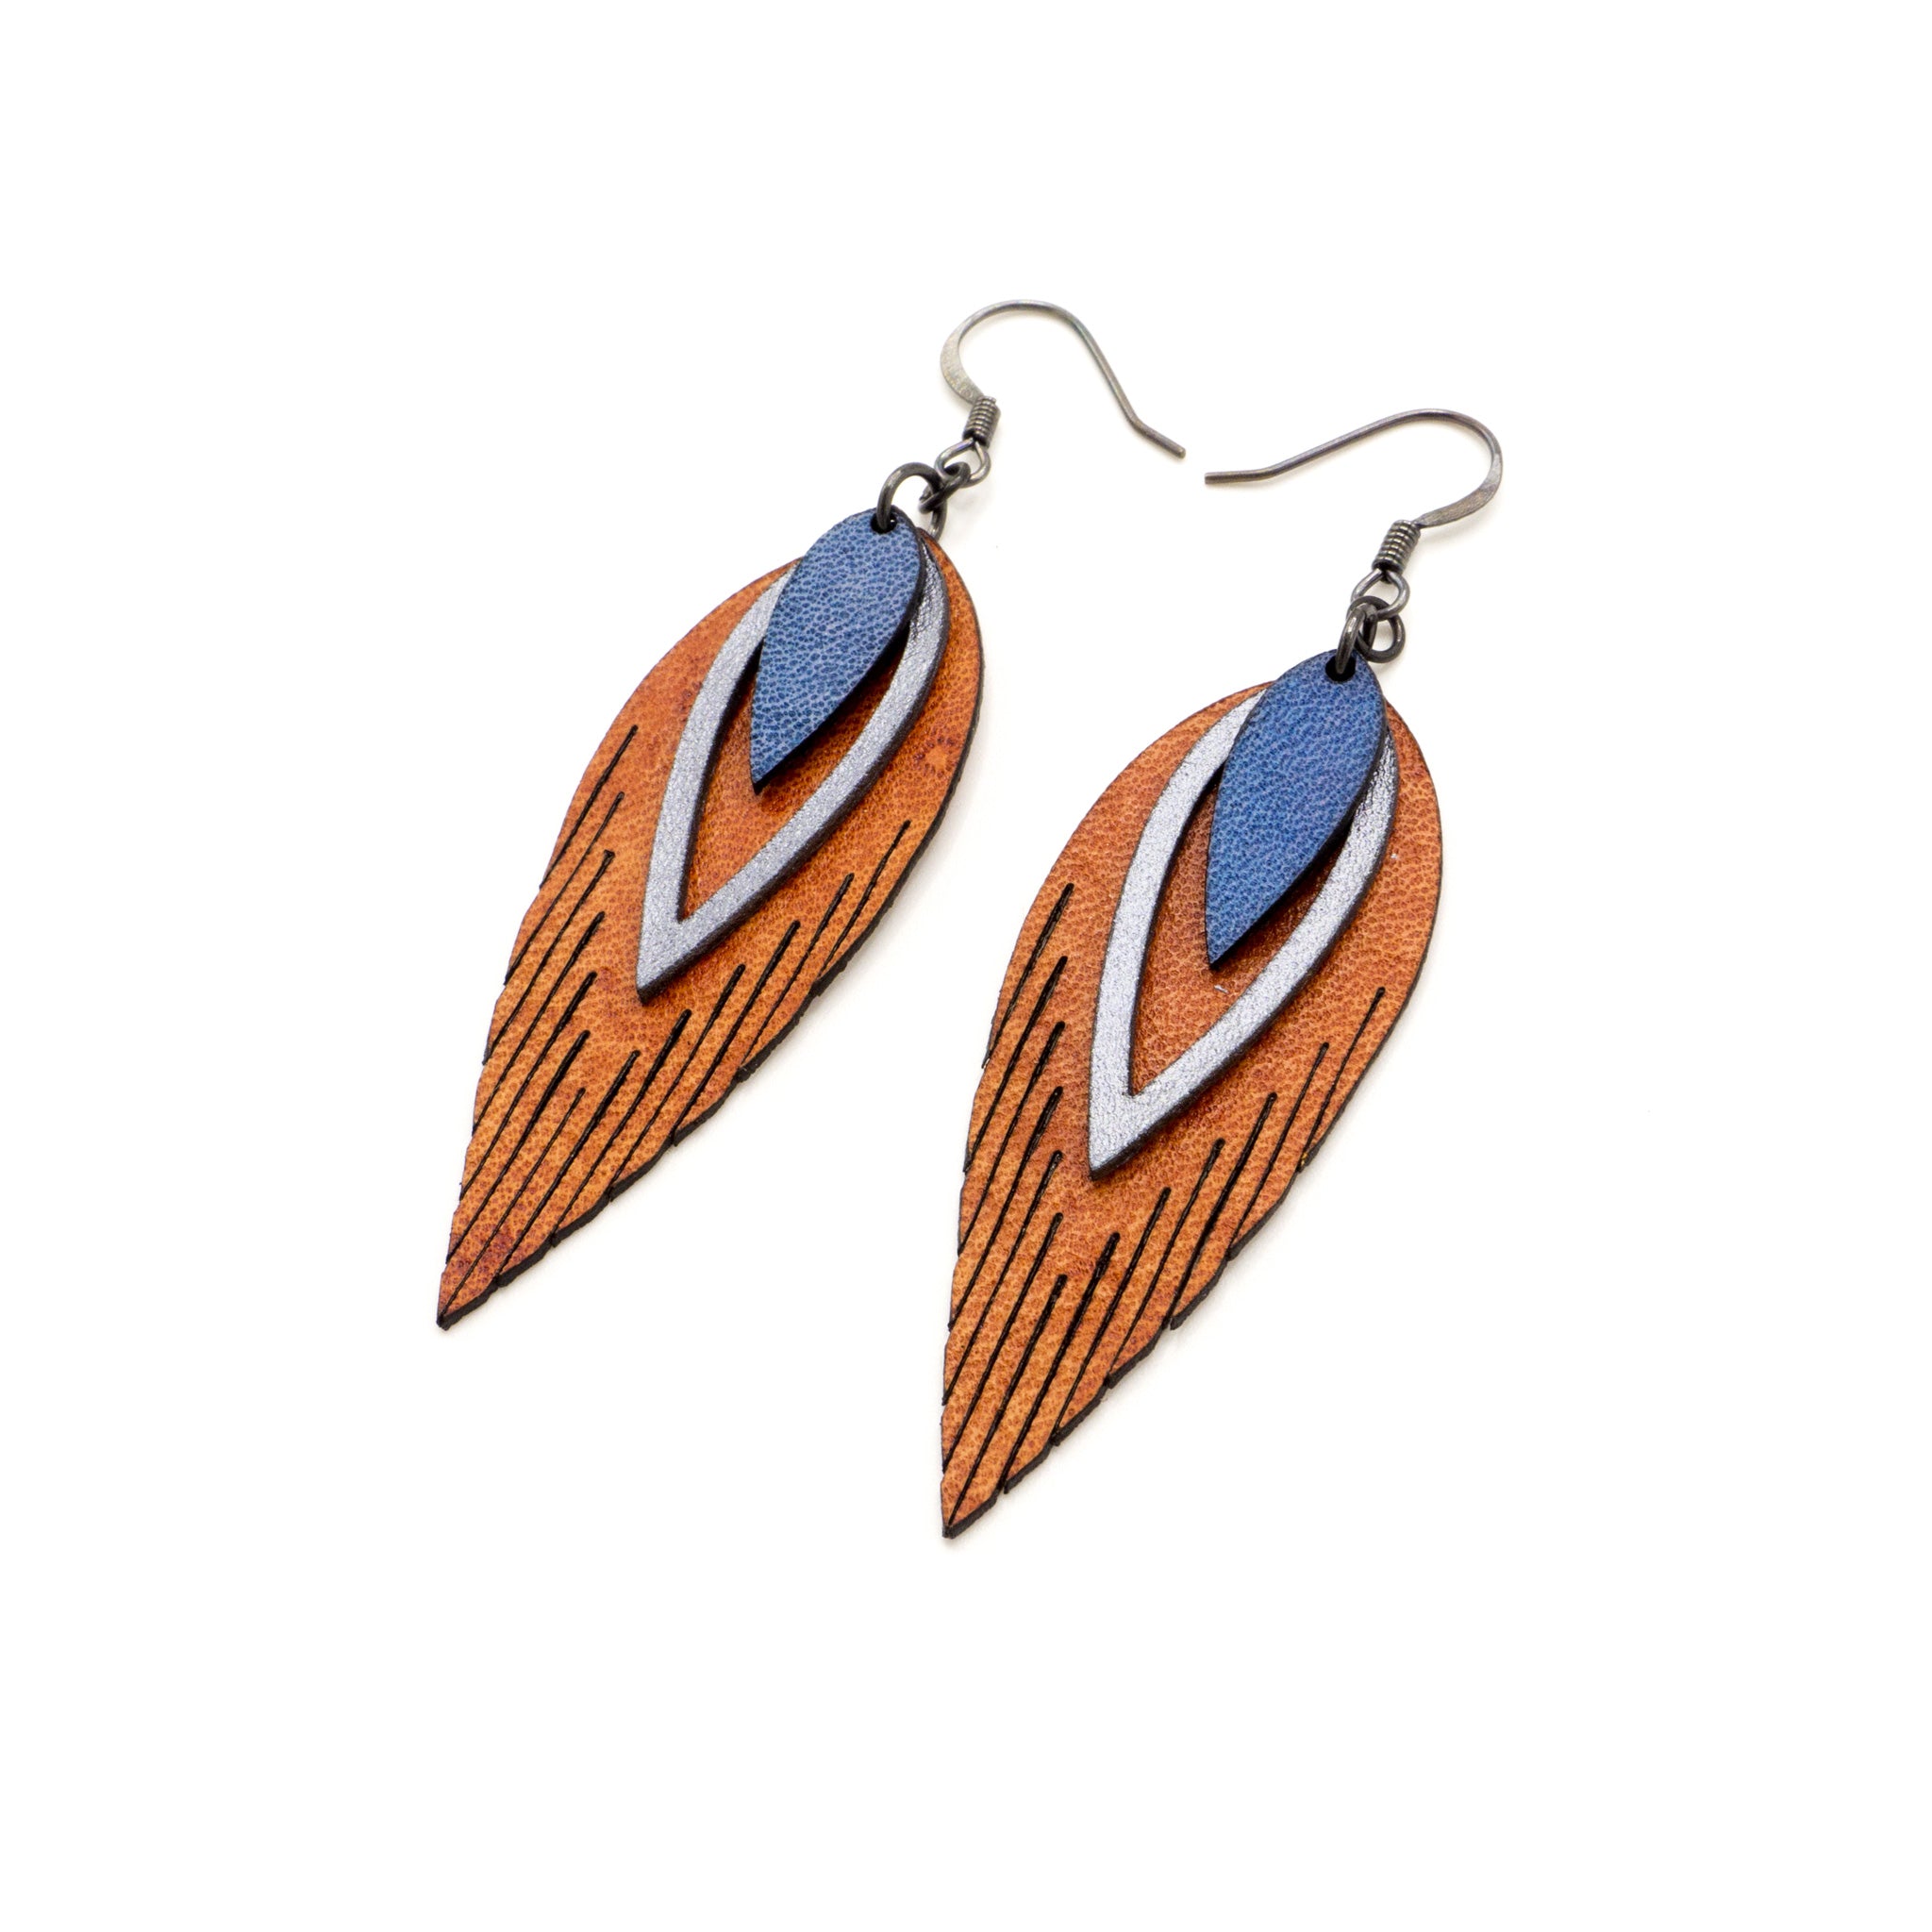 Firebird Earrings Handpainted Tooled Leather Southwestern Inspired Jewelry  Made to Order - Etsy